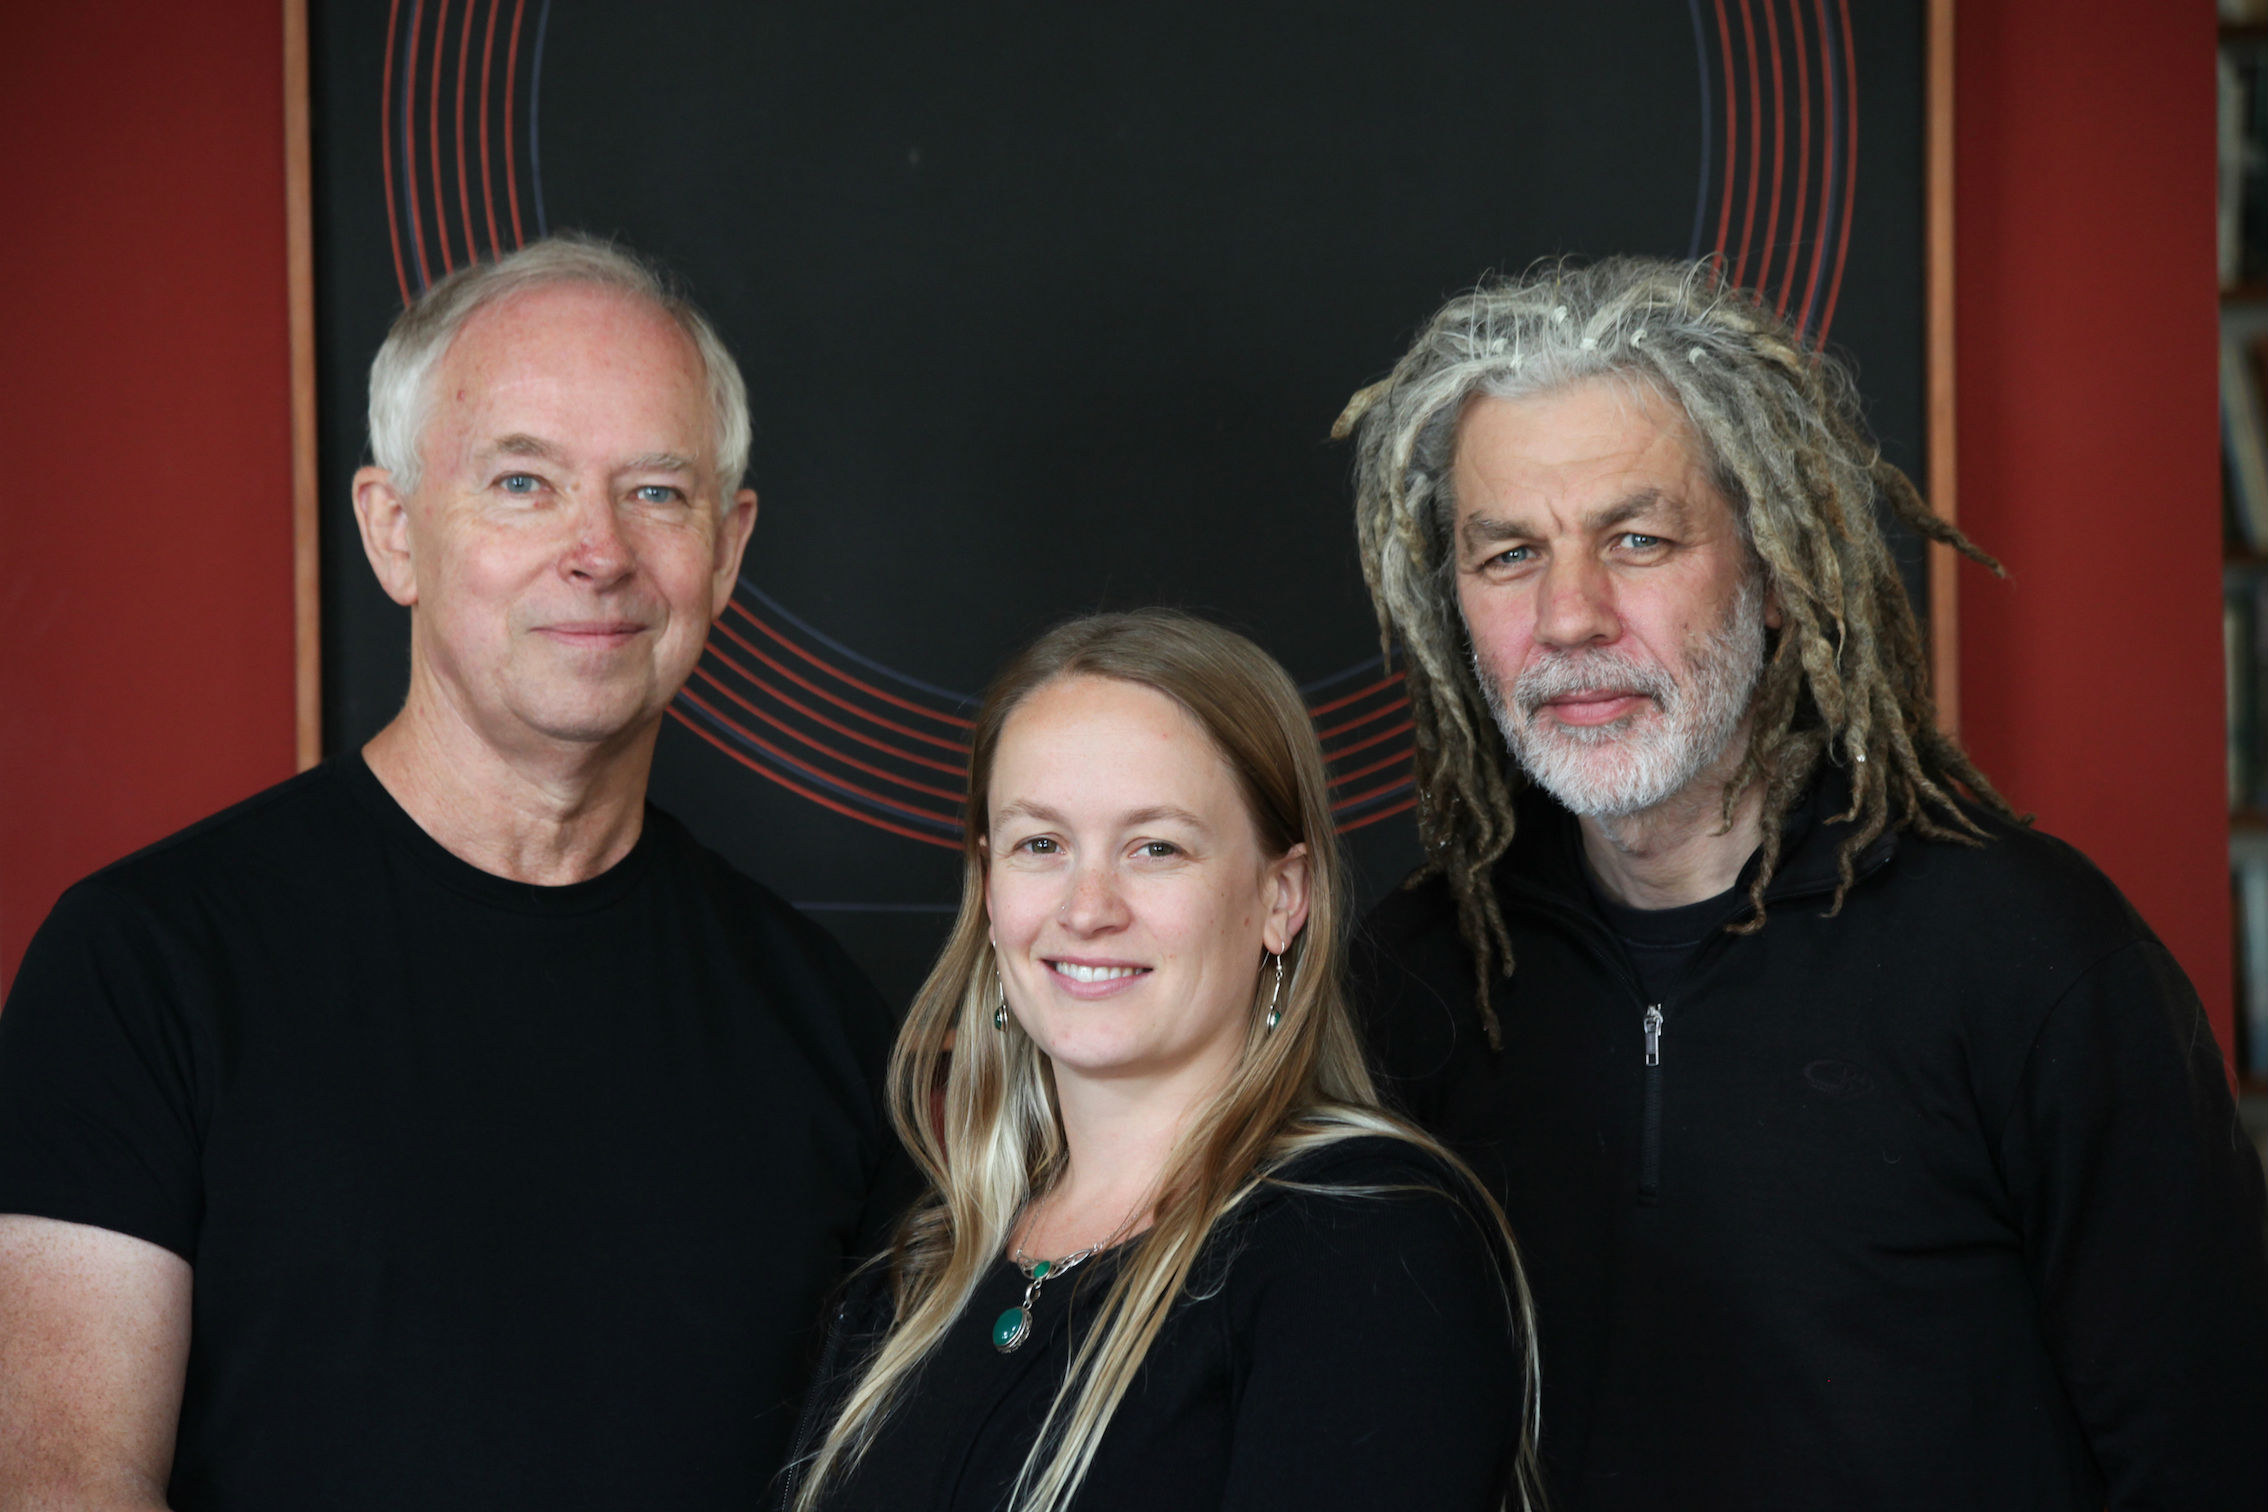 Poet Bill Manhire, vocalist Hannah Griffin and composer Norman Meehan